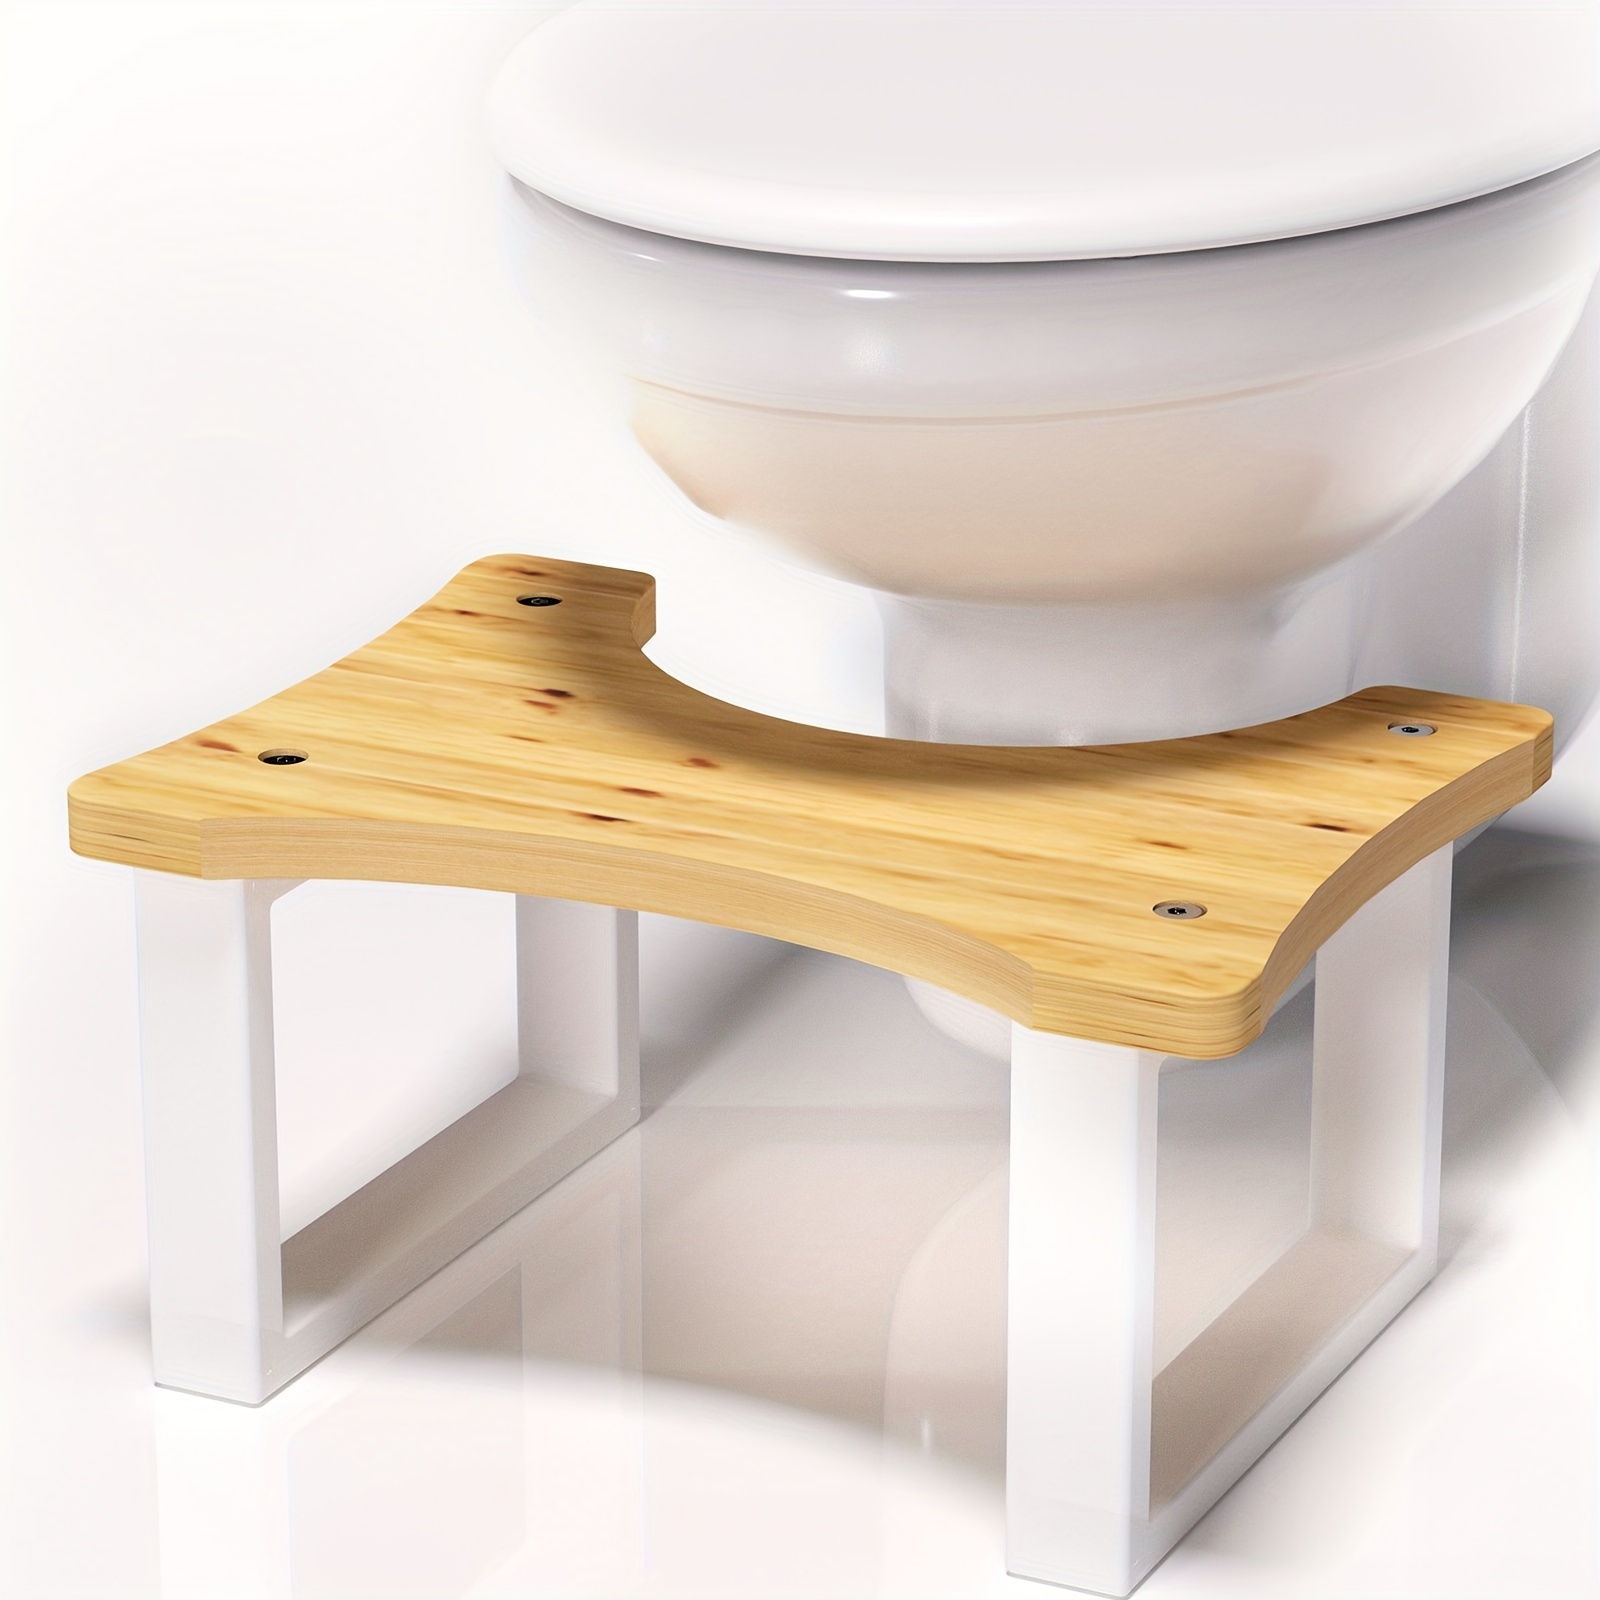 

Bamboo Toilet Stool, 7 Inch Potty Poop Bathroom Stool With Extra Soft Microfiber Rug And Hooks, Non-slip Toilet Assistance Step Stool For Adult, Improve Squatting Posture - Healthy Gifts